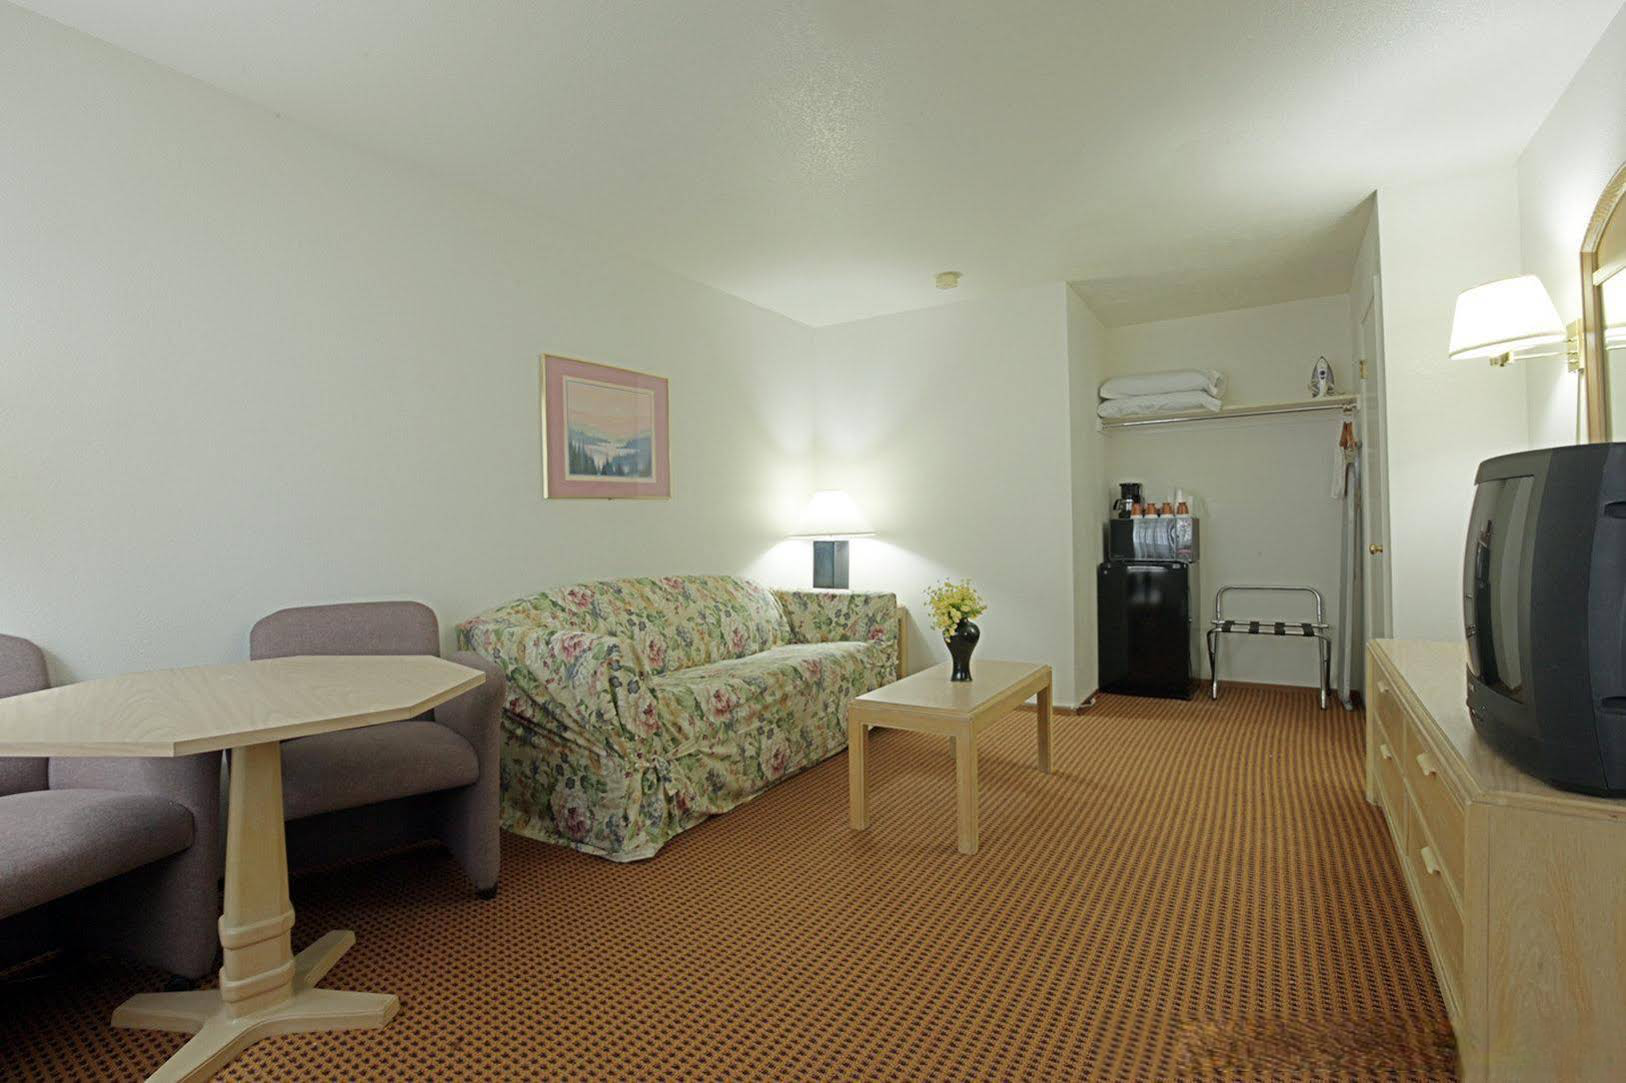 Americas Best Value Inn and Suites Clearlake